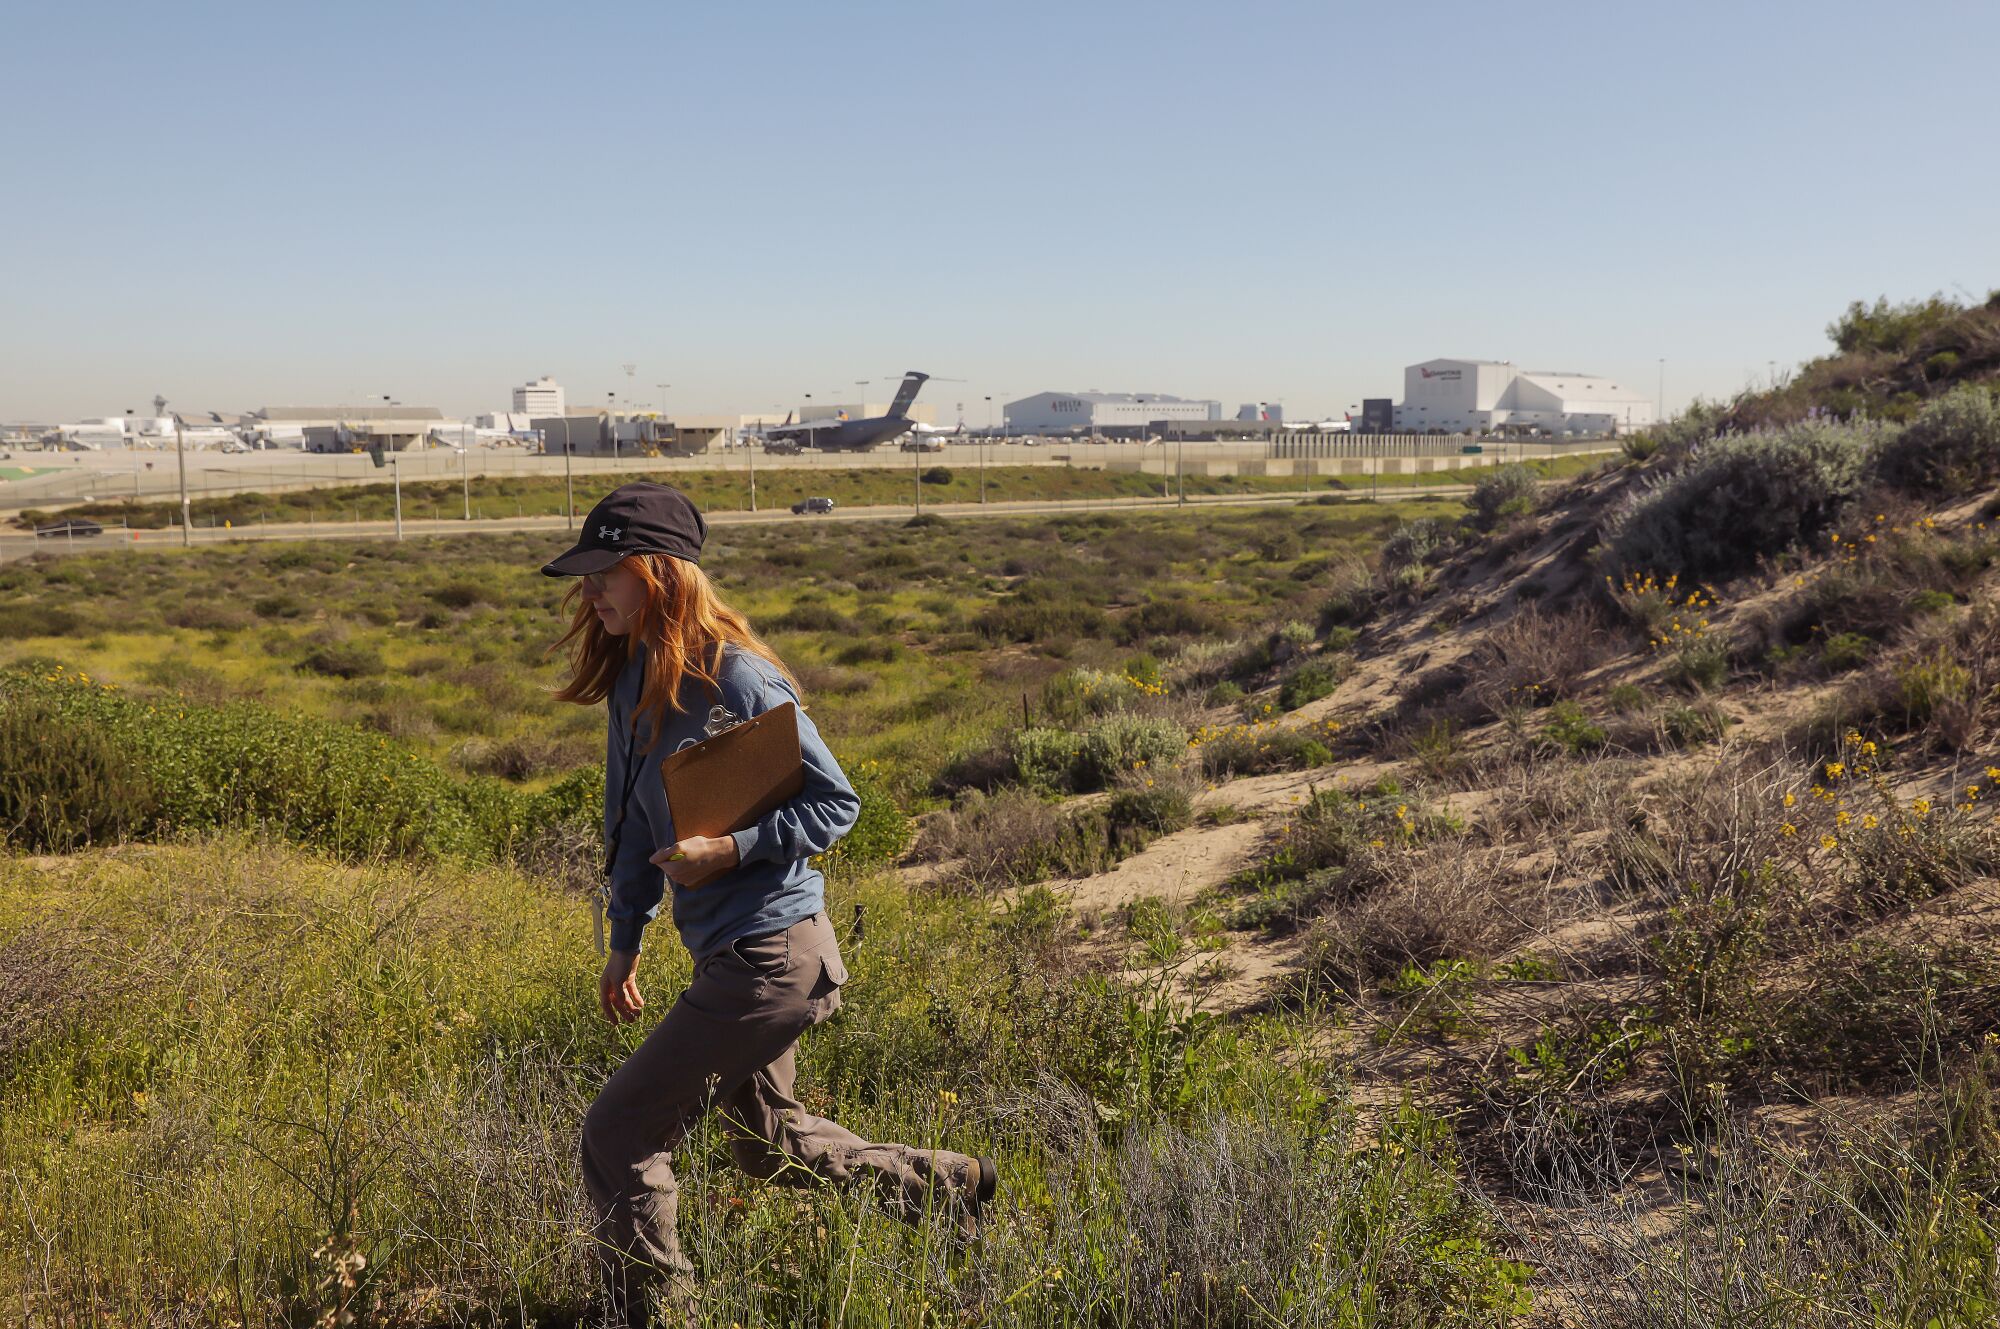 A woman wearing a baseball cap and holding a clipboard walks through greenery, with parked airplanes in the background.